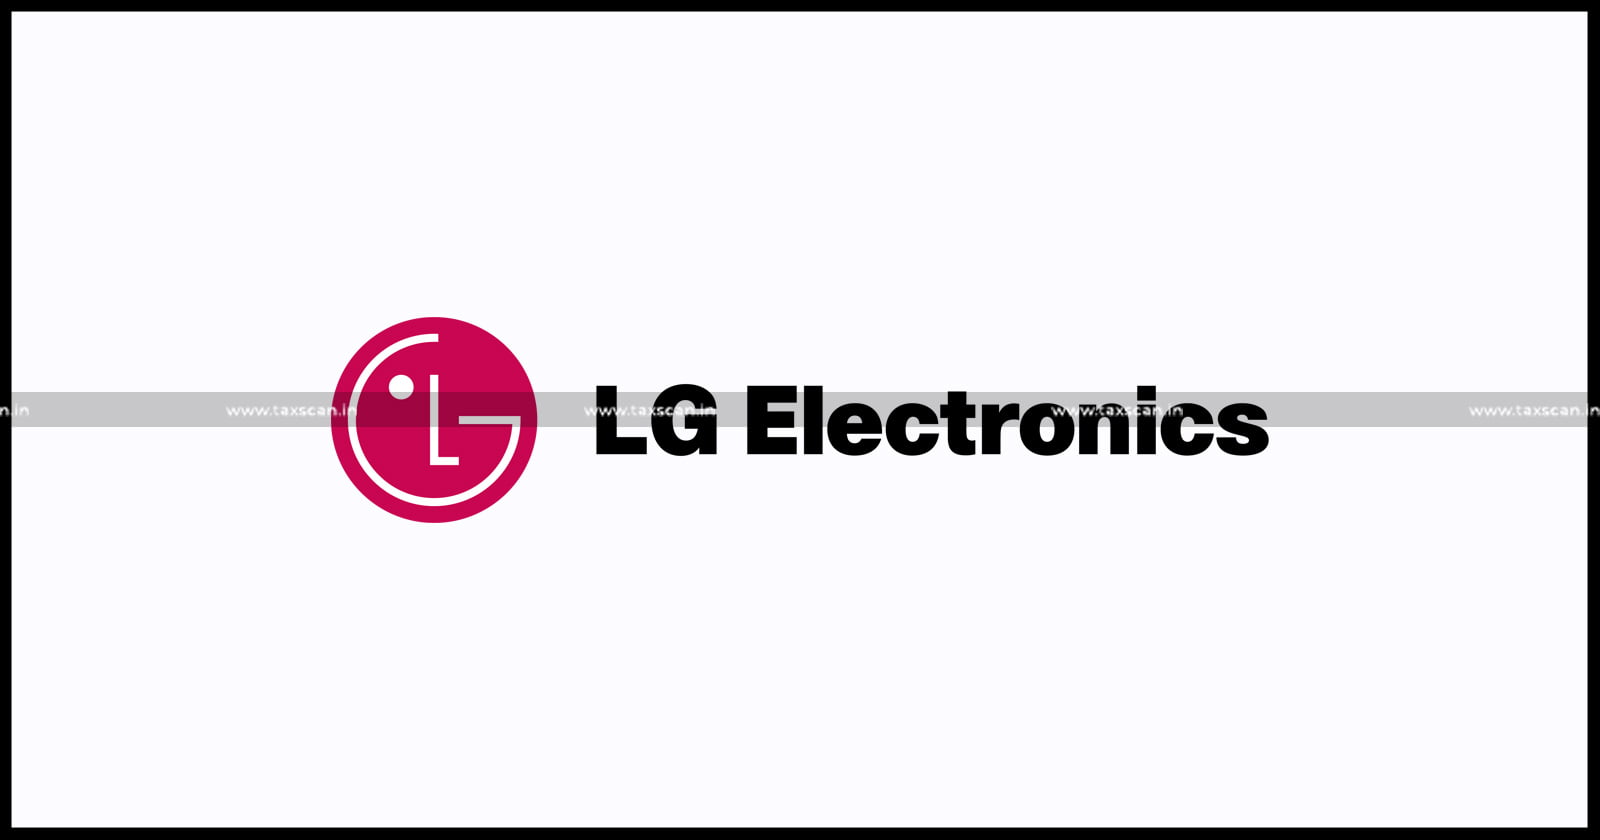 LG Electronics - LG - Concessional Rate - Customs Duty on Import - G Watch - taxscan